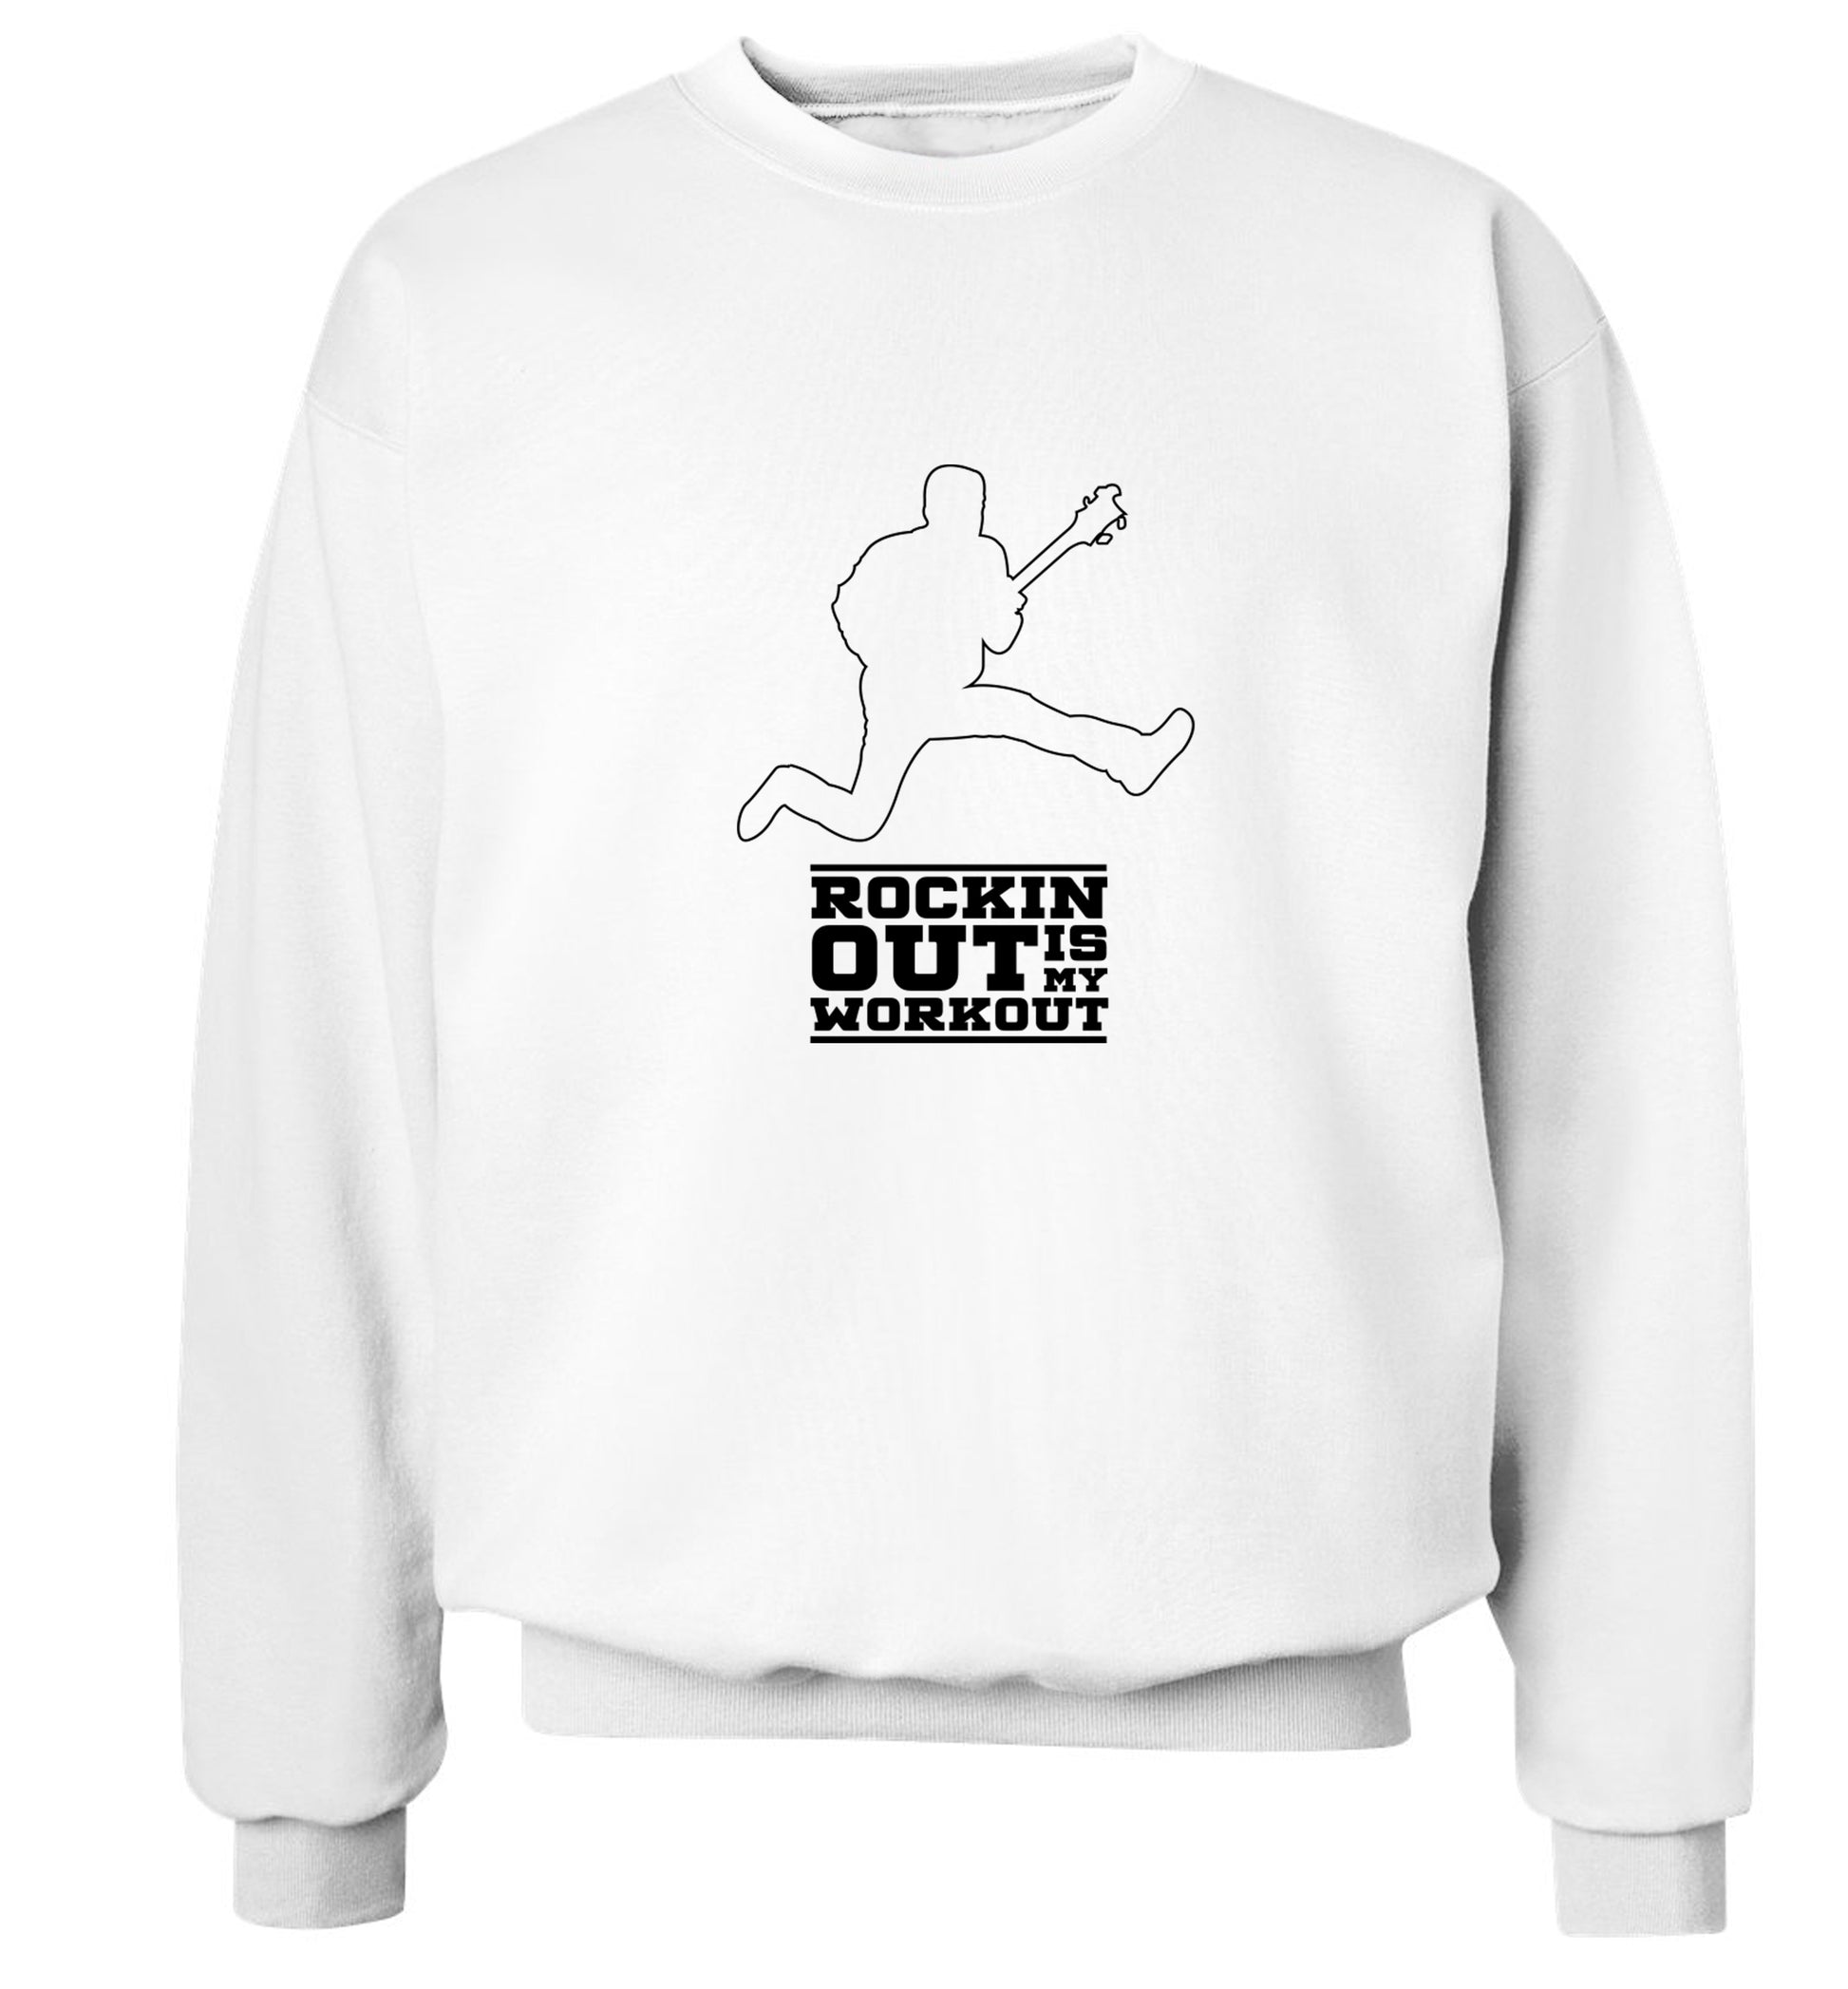 Rockin out is my workout 2 Adult's unisex white Sweater 2XL